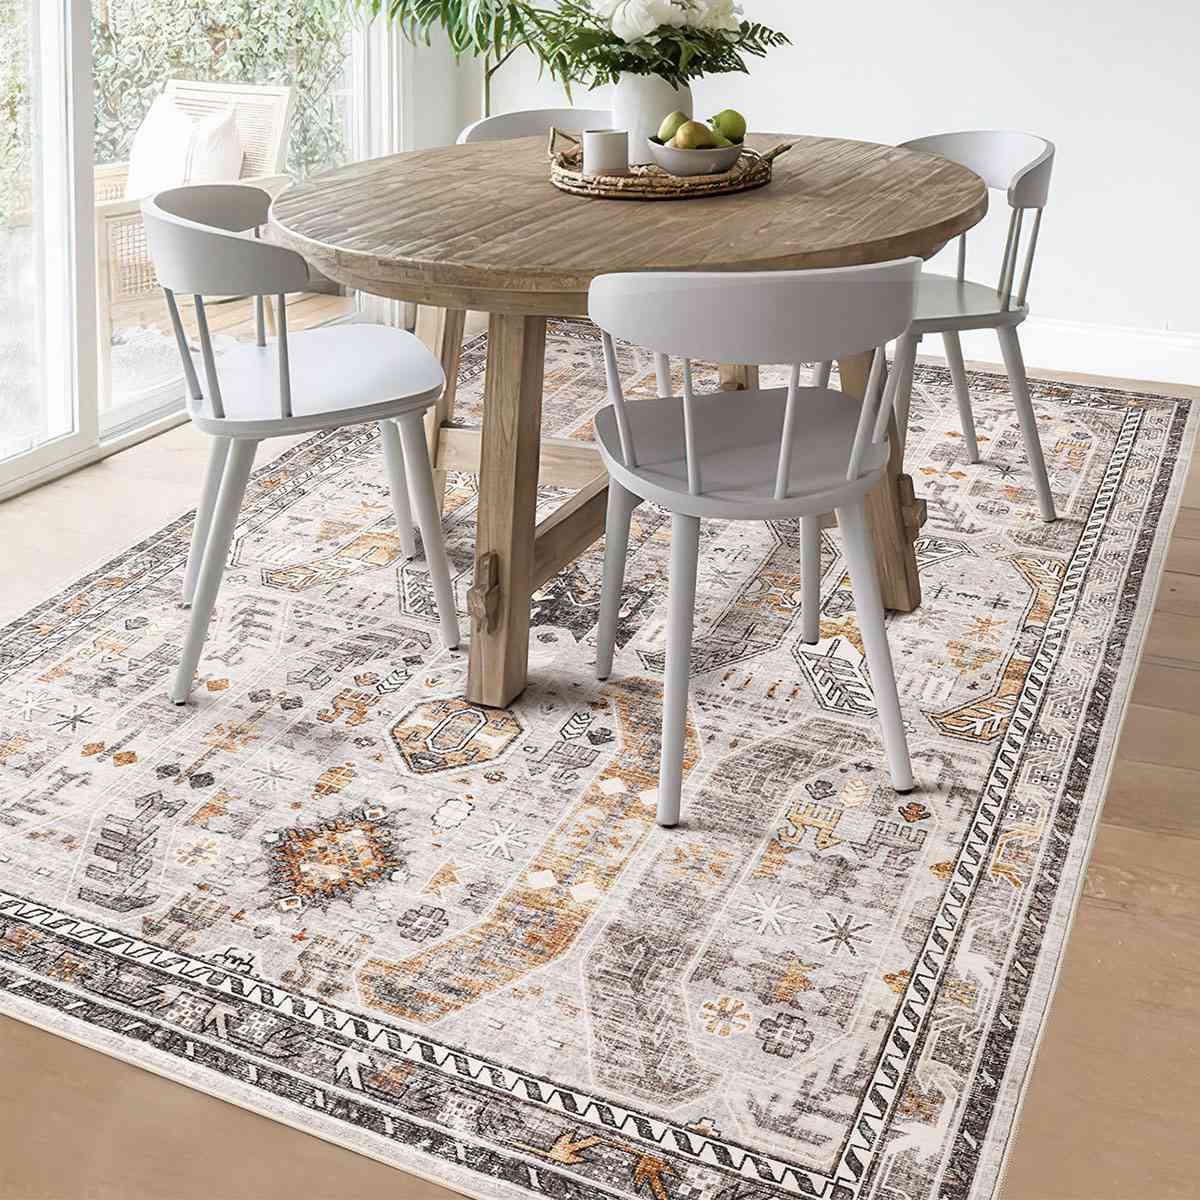 Comicomi Large Rugs for Living Room Ava Reverberate